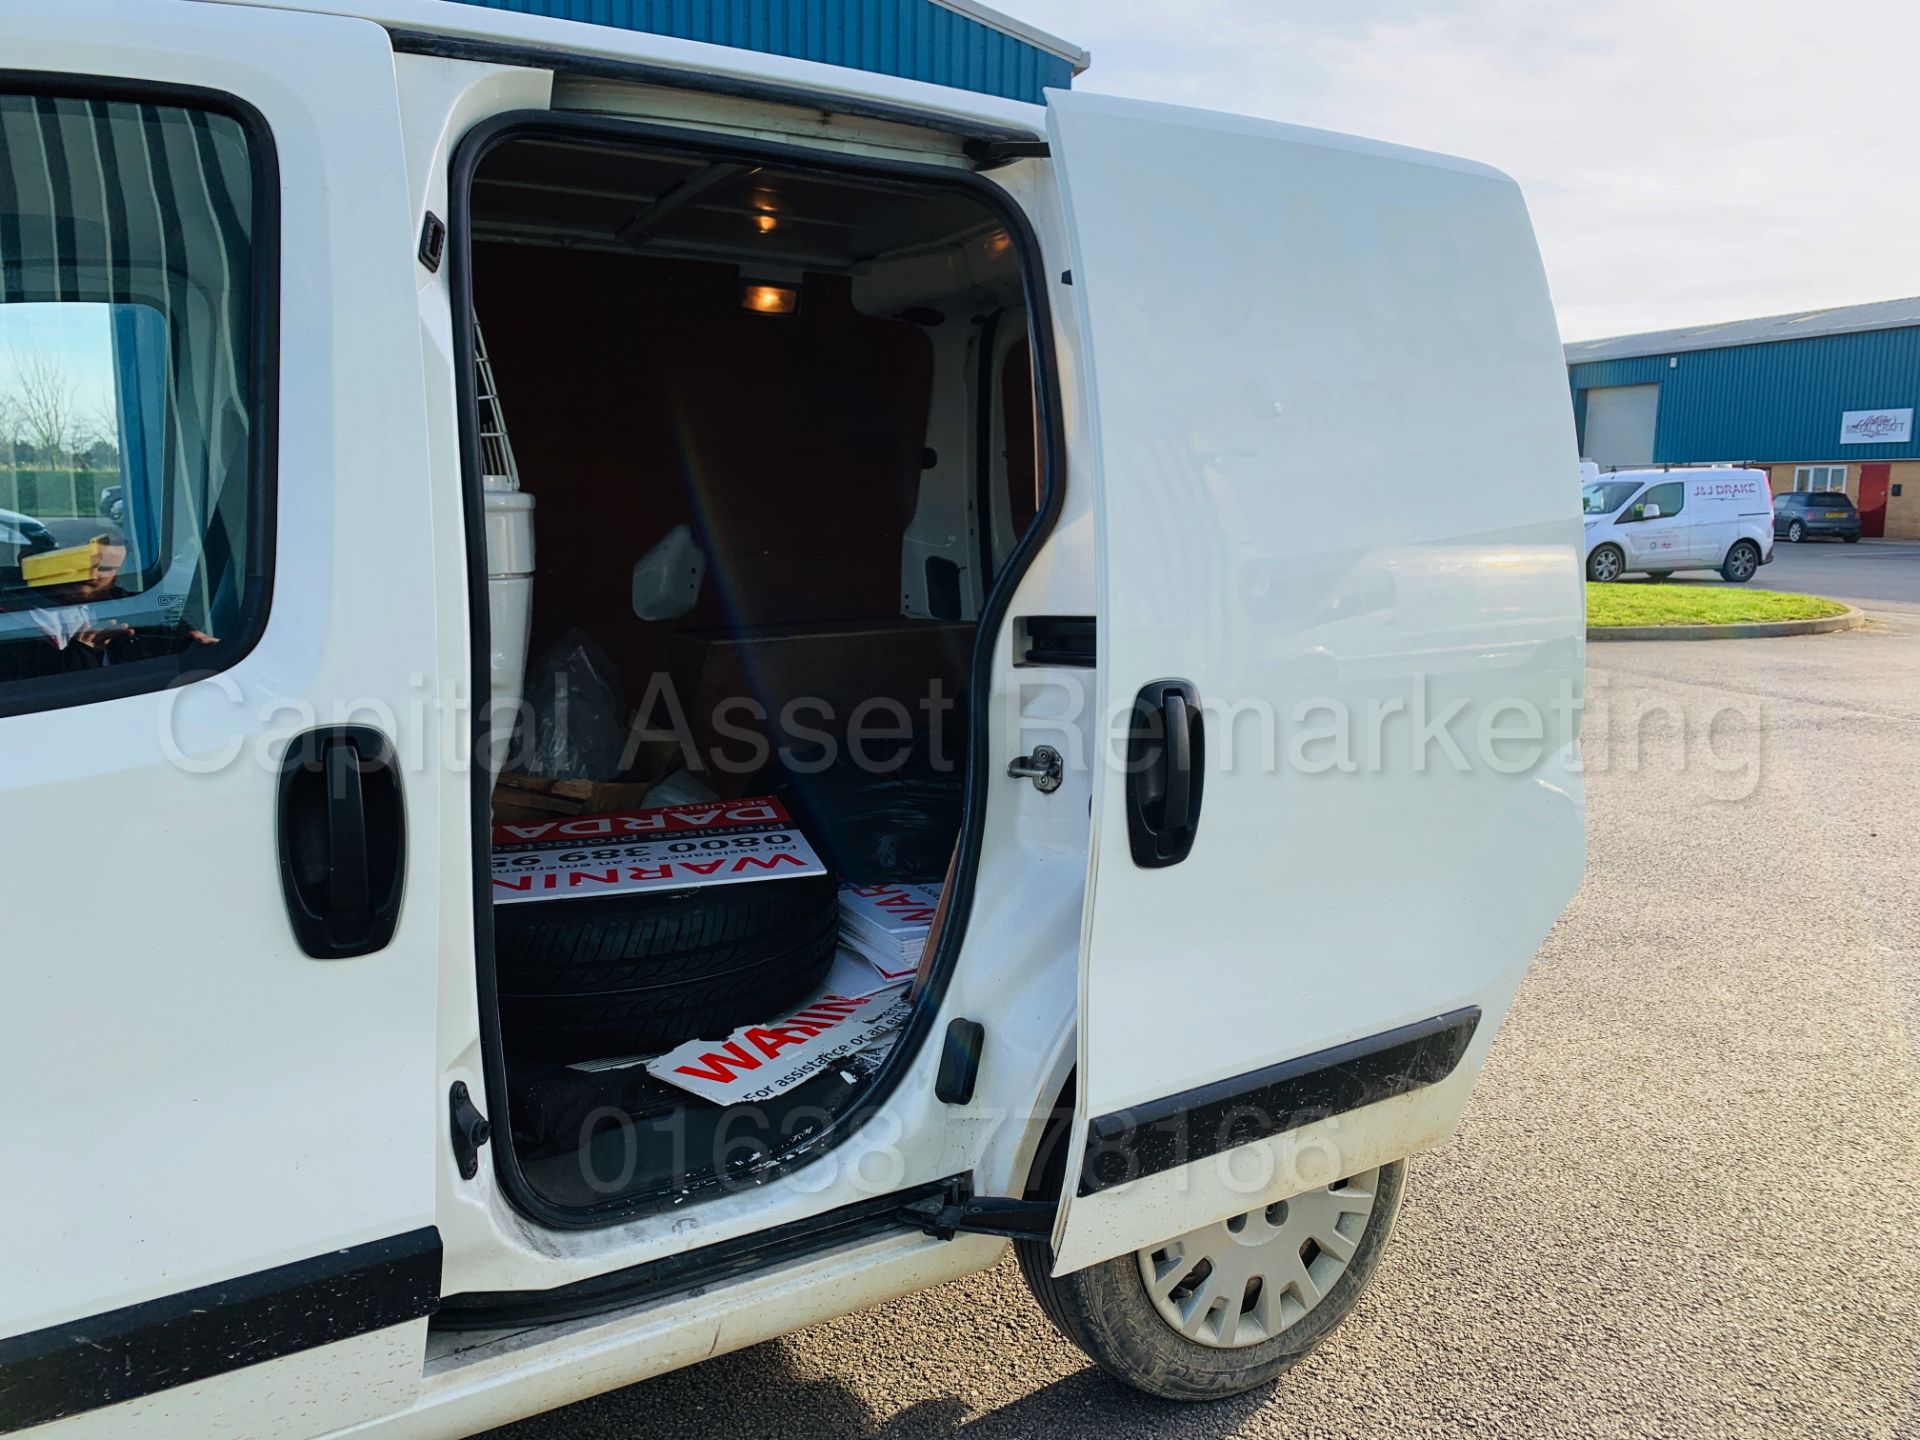 (On Sale) PEUGEOT BIPPER *PROFESSIONAL* LCV - PANEL VAN (65 REG) 'HDI - 5 SPEED' (1 OWNER) *AIR CON* - Image 19 of 36